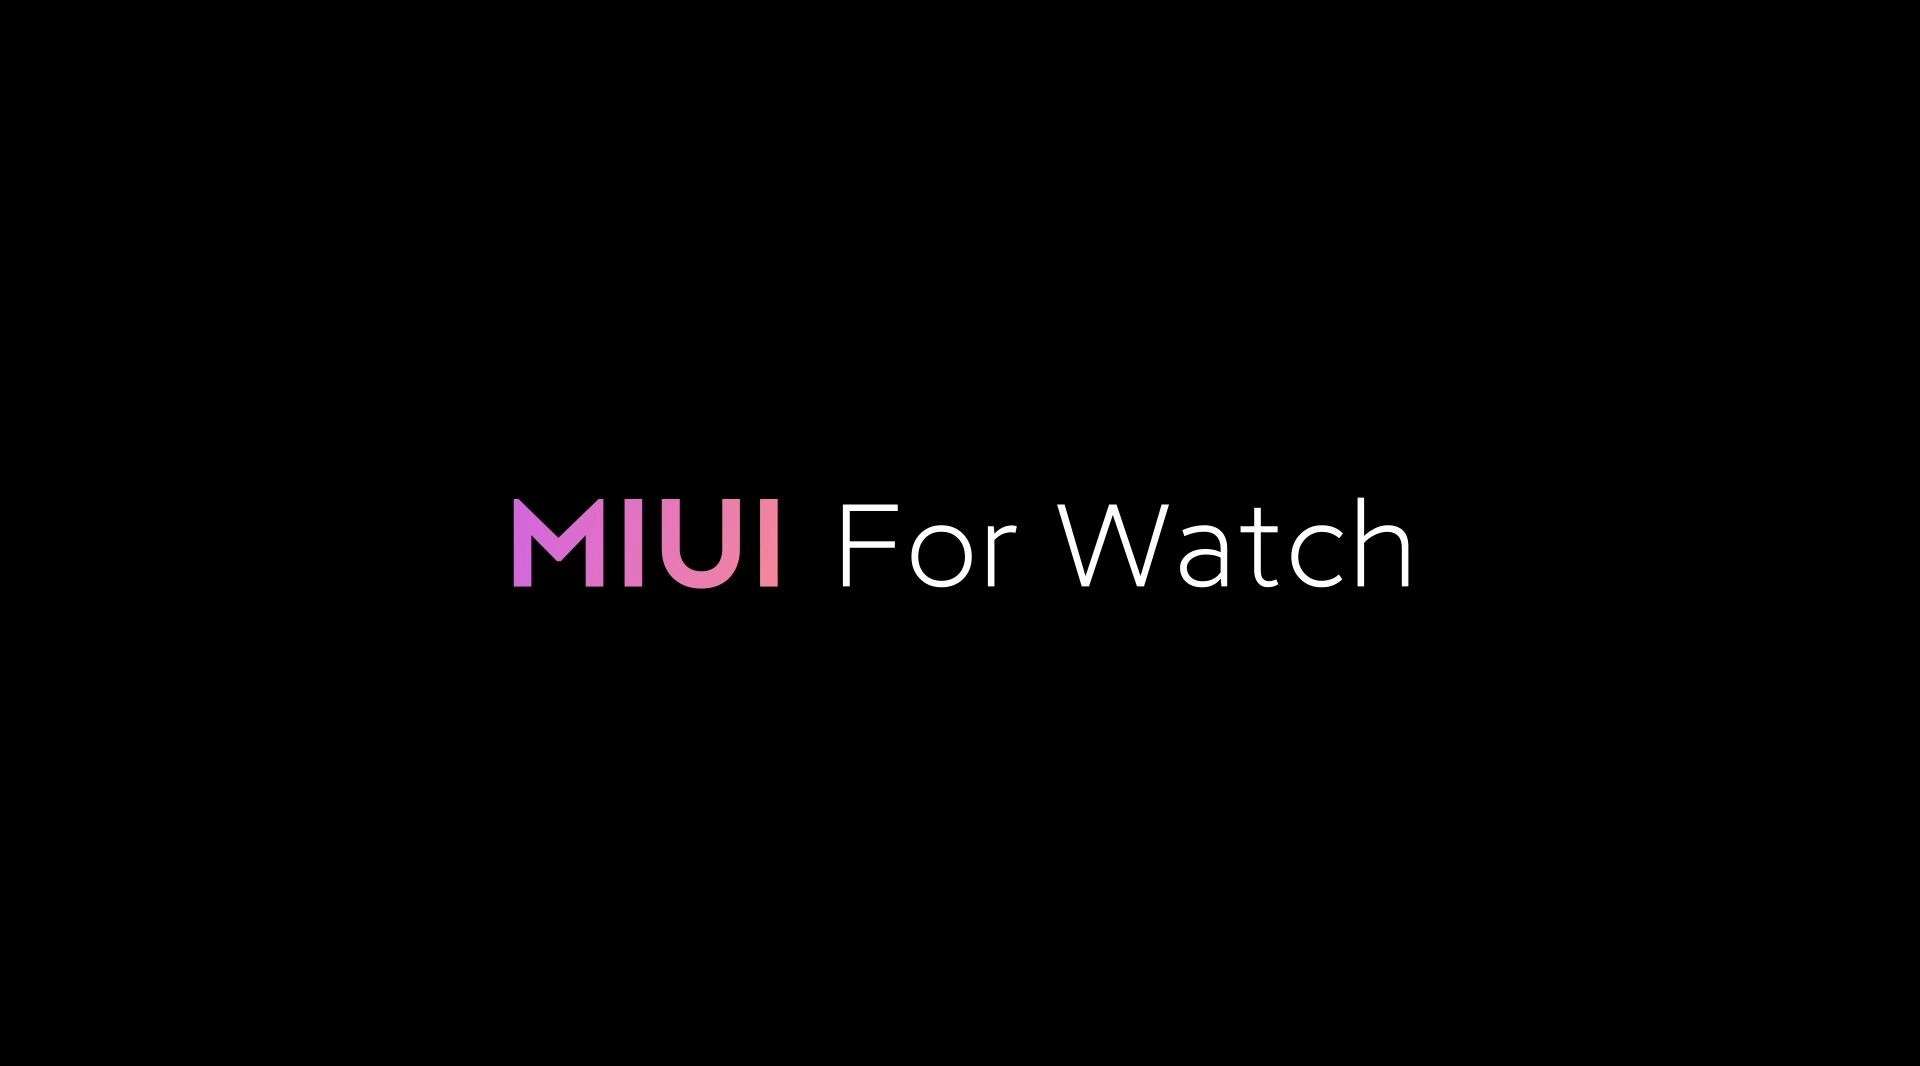 MIUI for Watch